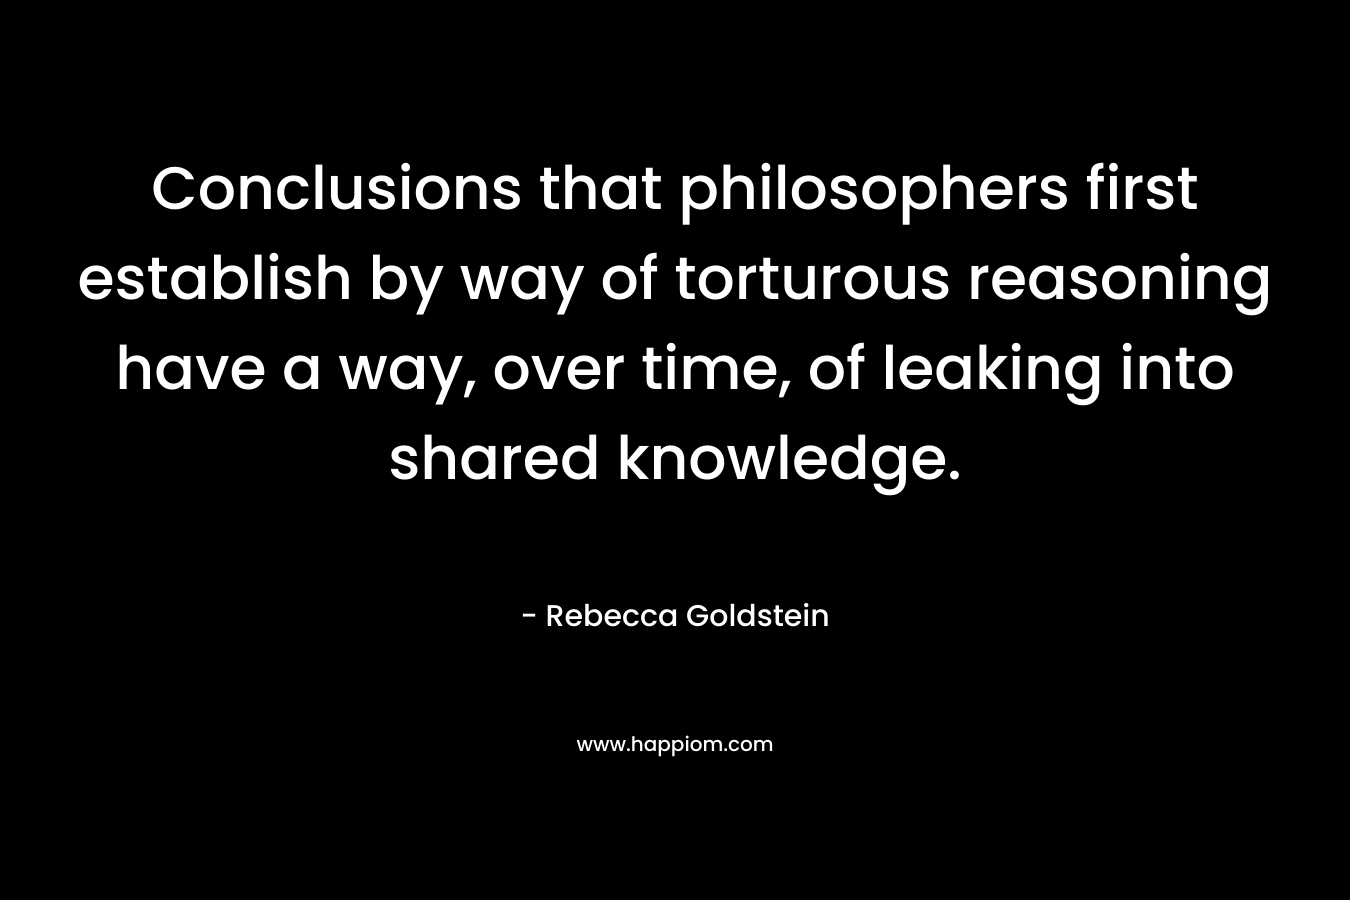 Conclusions that philosophers first establish by way of torturous reasoning have a way, over time, of leaking into shared knowledge.